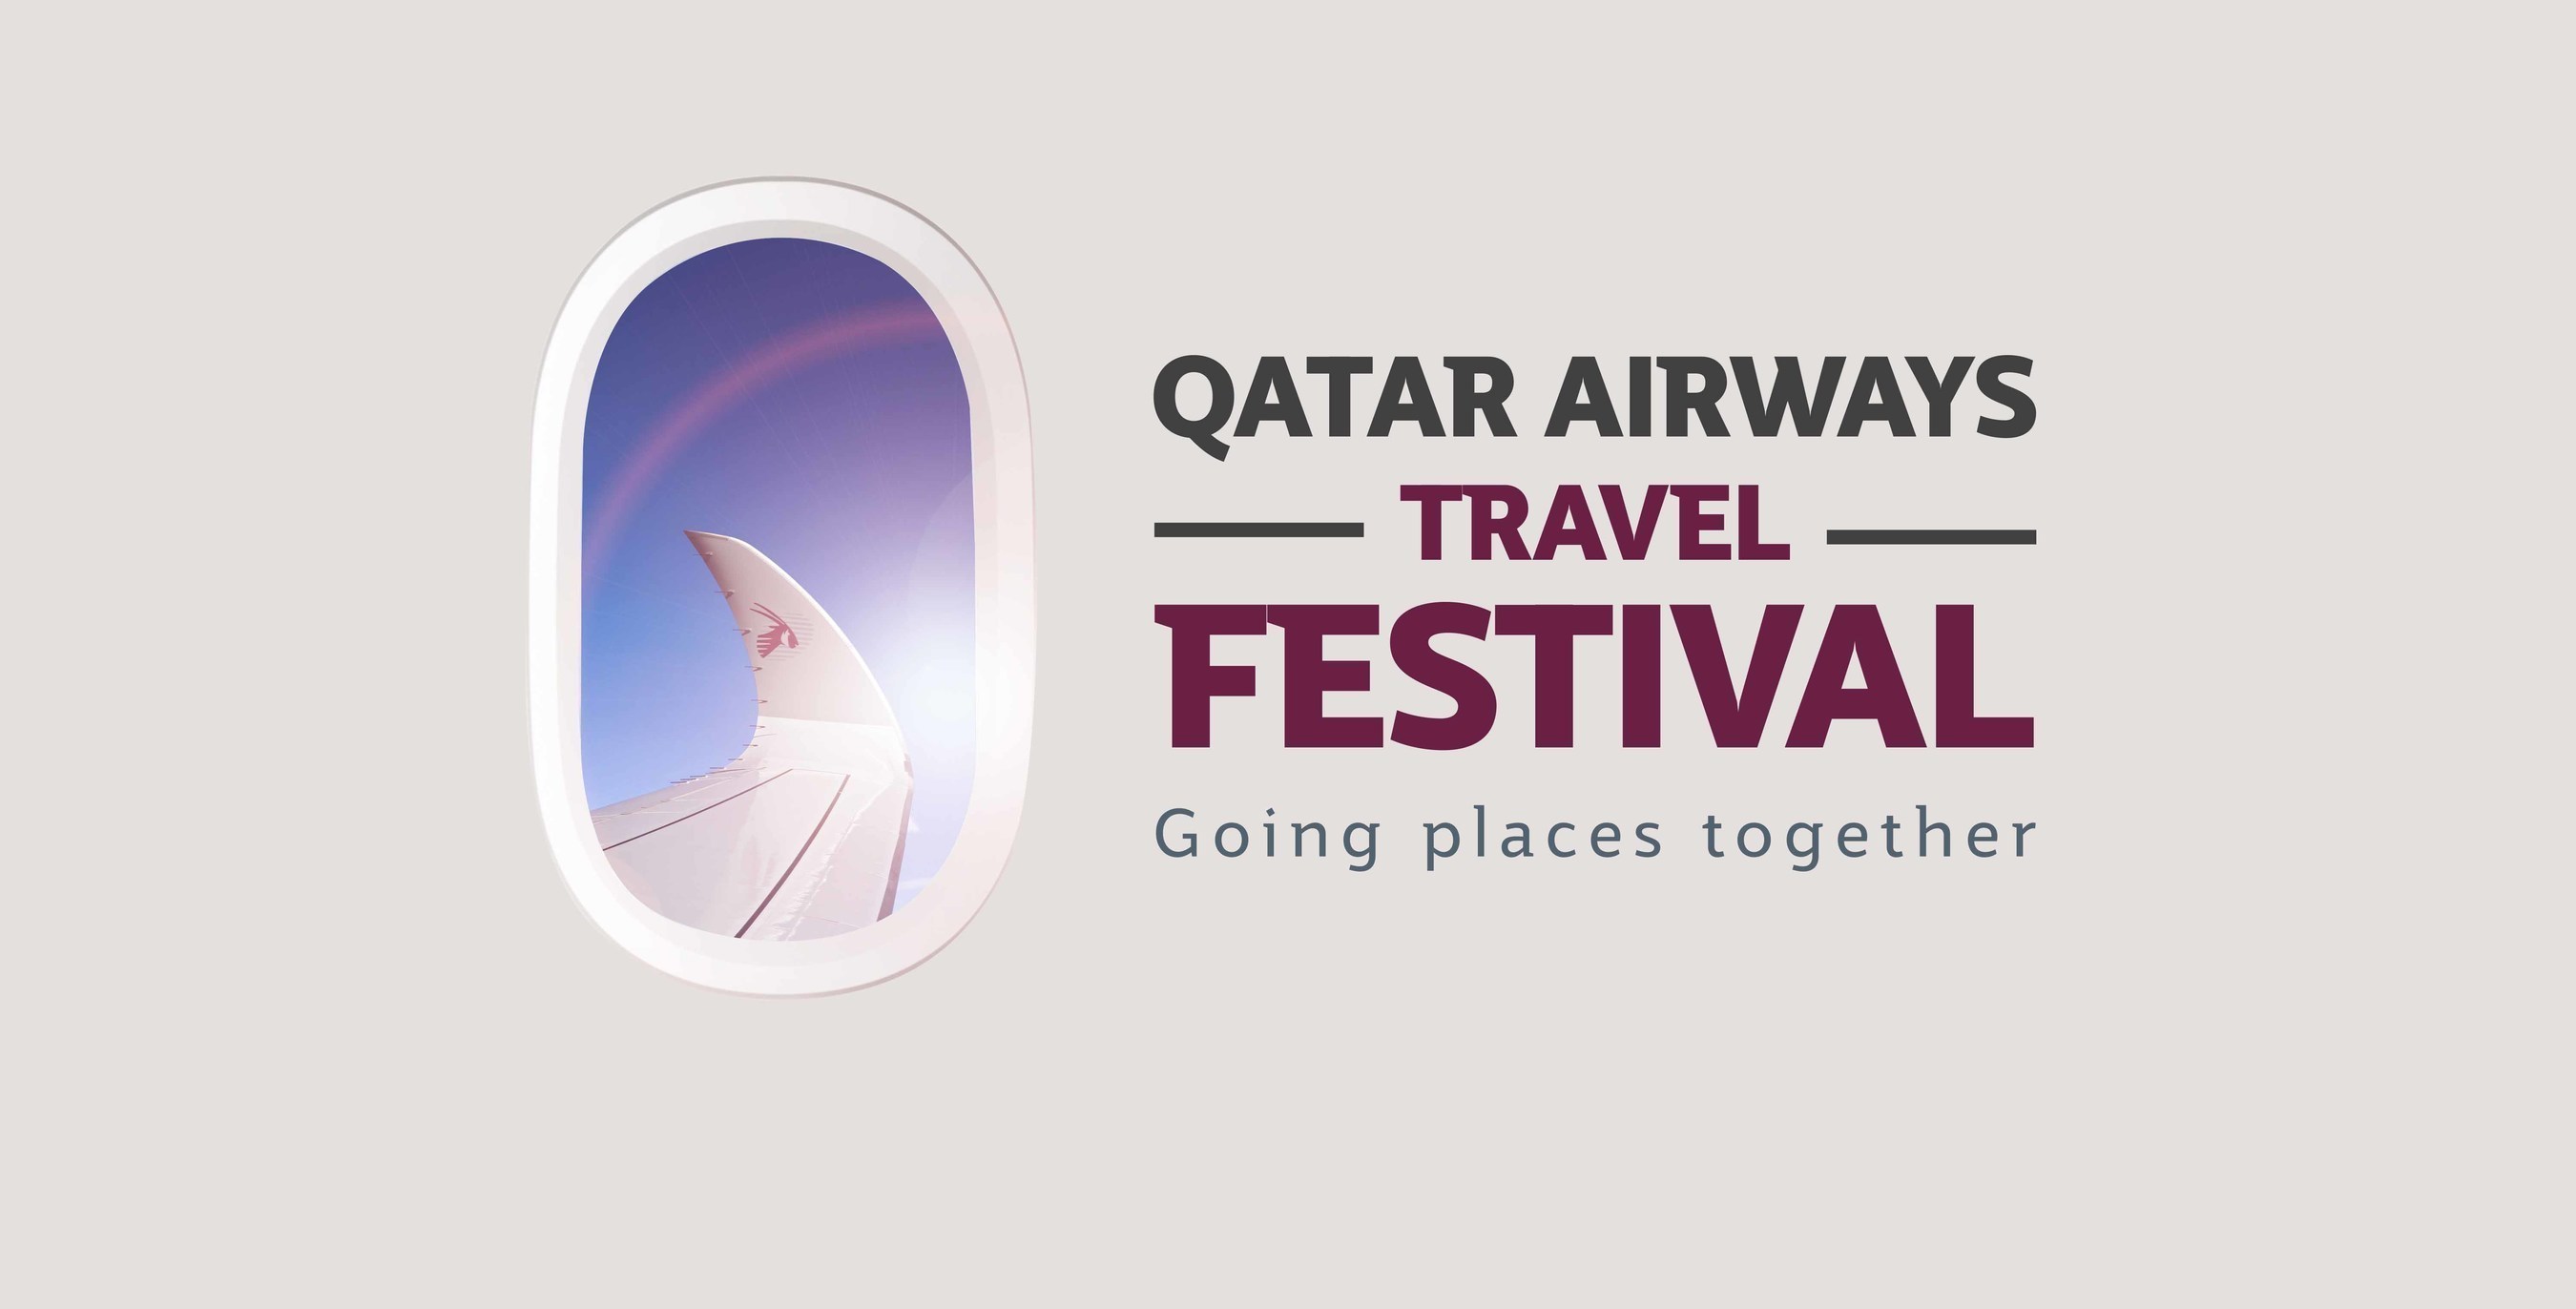 Qatar Airways Travel Festival: Choose from dream deals including flight offers starting from $685, companion fares, hotel & car rental discounts